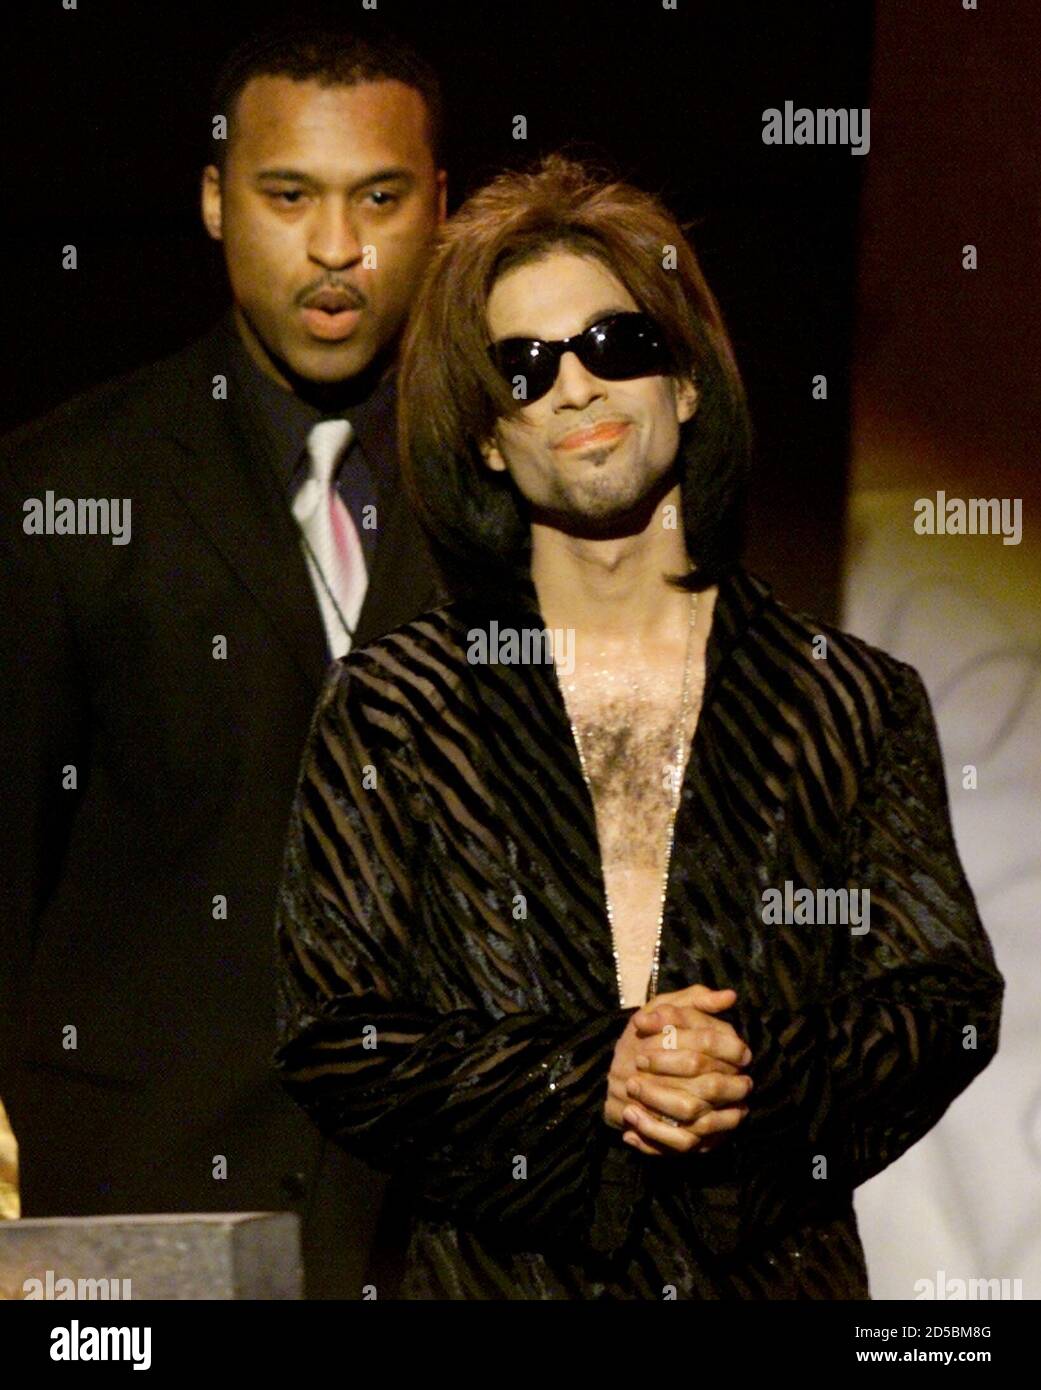 'The Artist' formerly known as Prince, accompanied by his bodyguard, listens to the applause of the crowd after being named Male Artist of the Decade at the 14th annual Soul Train Music Awards March 4.  GMH Stock Photo